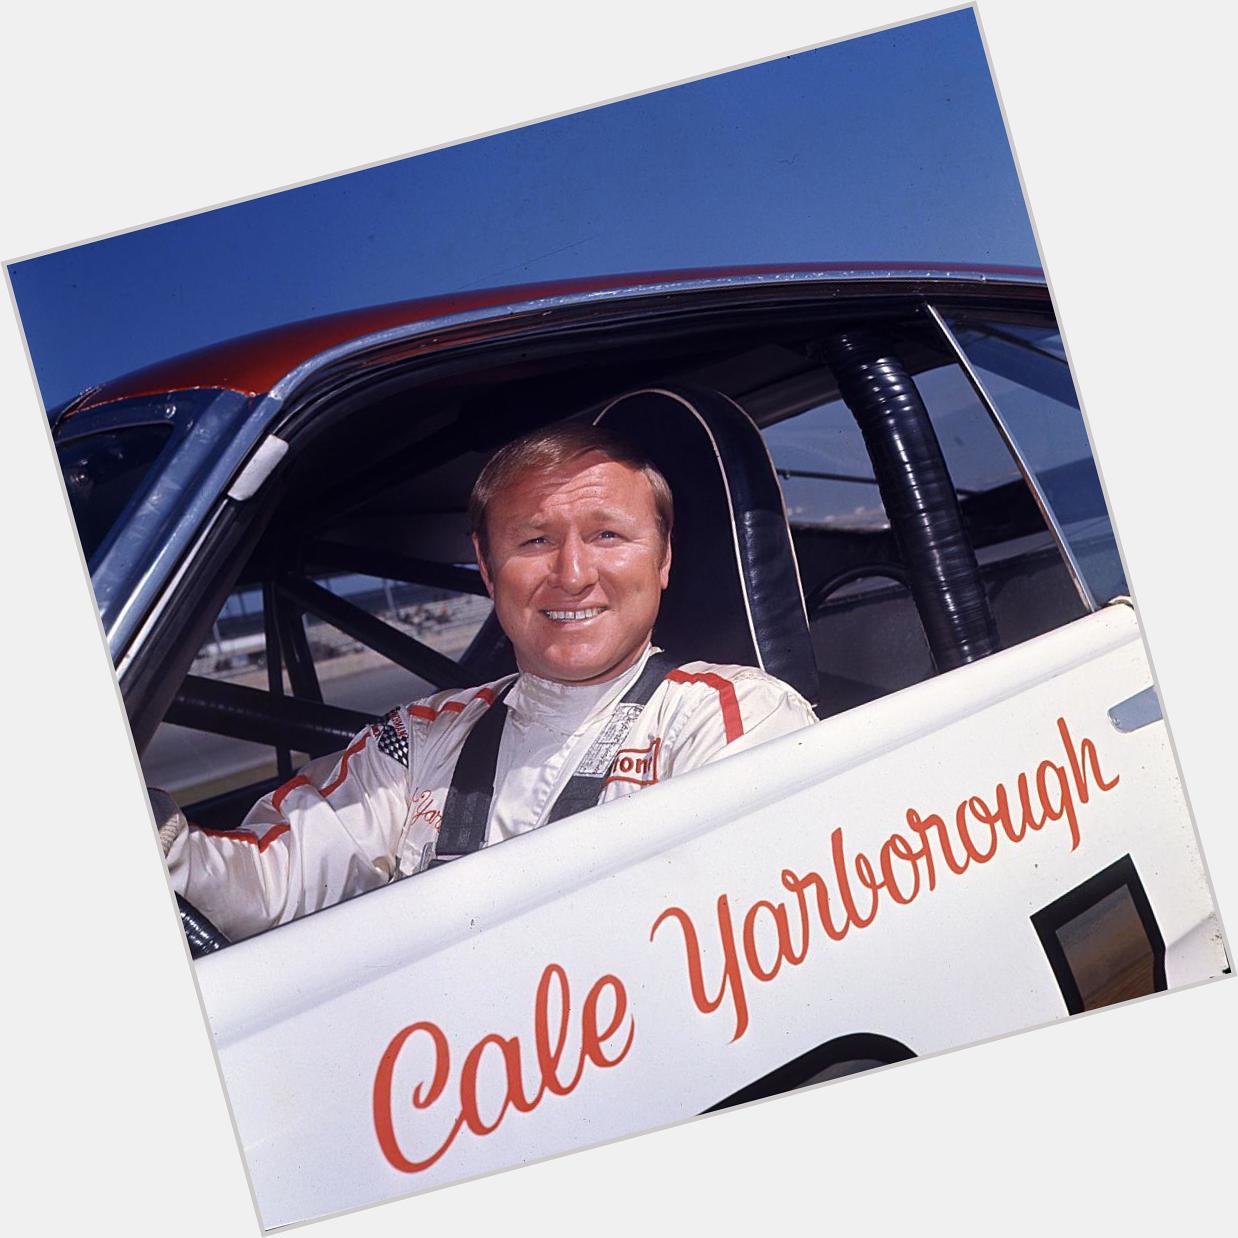 MT Please join me in wishing 3 time premier series champ Cale Yarborough a very happy bday. 